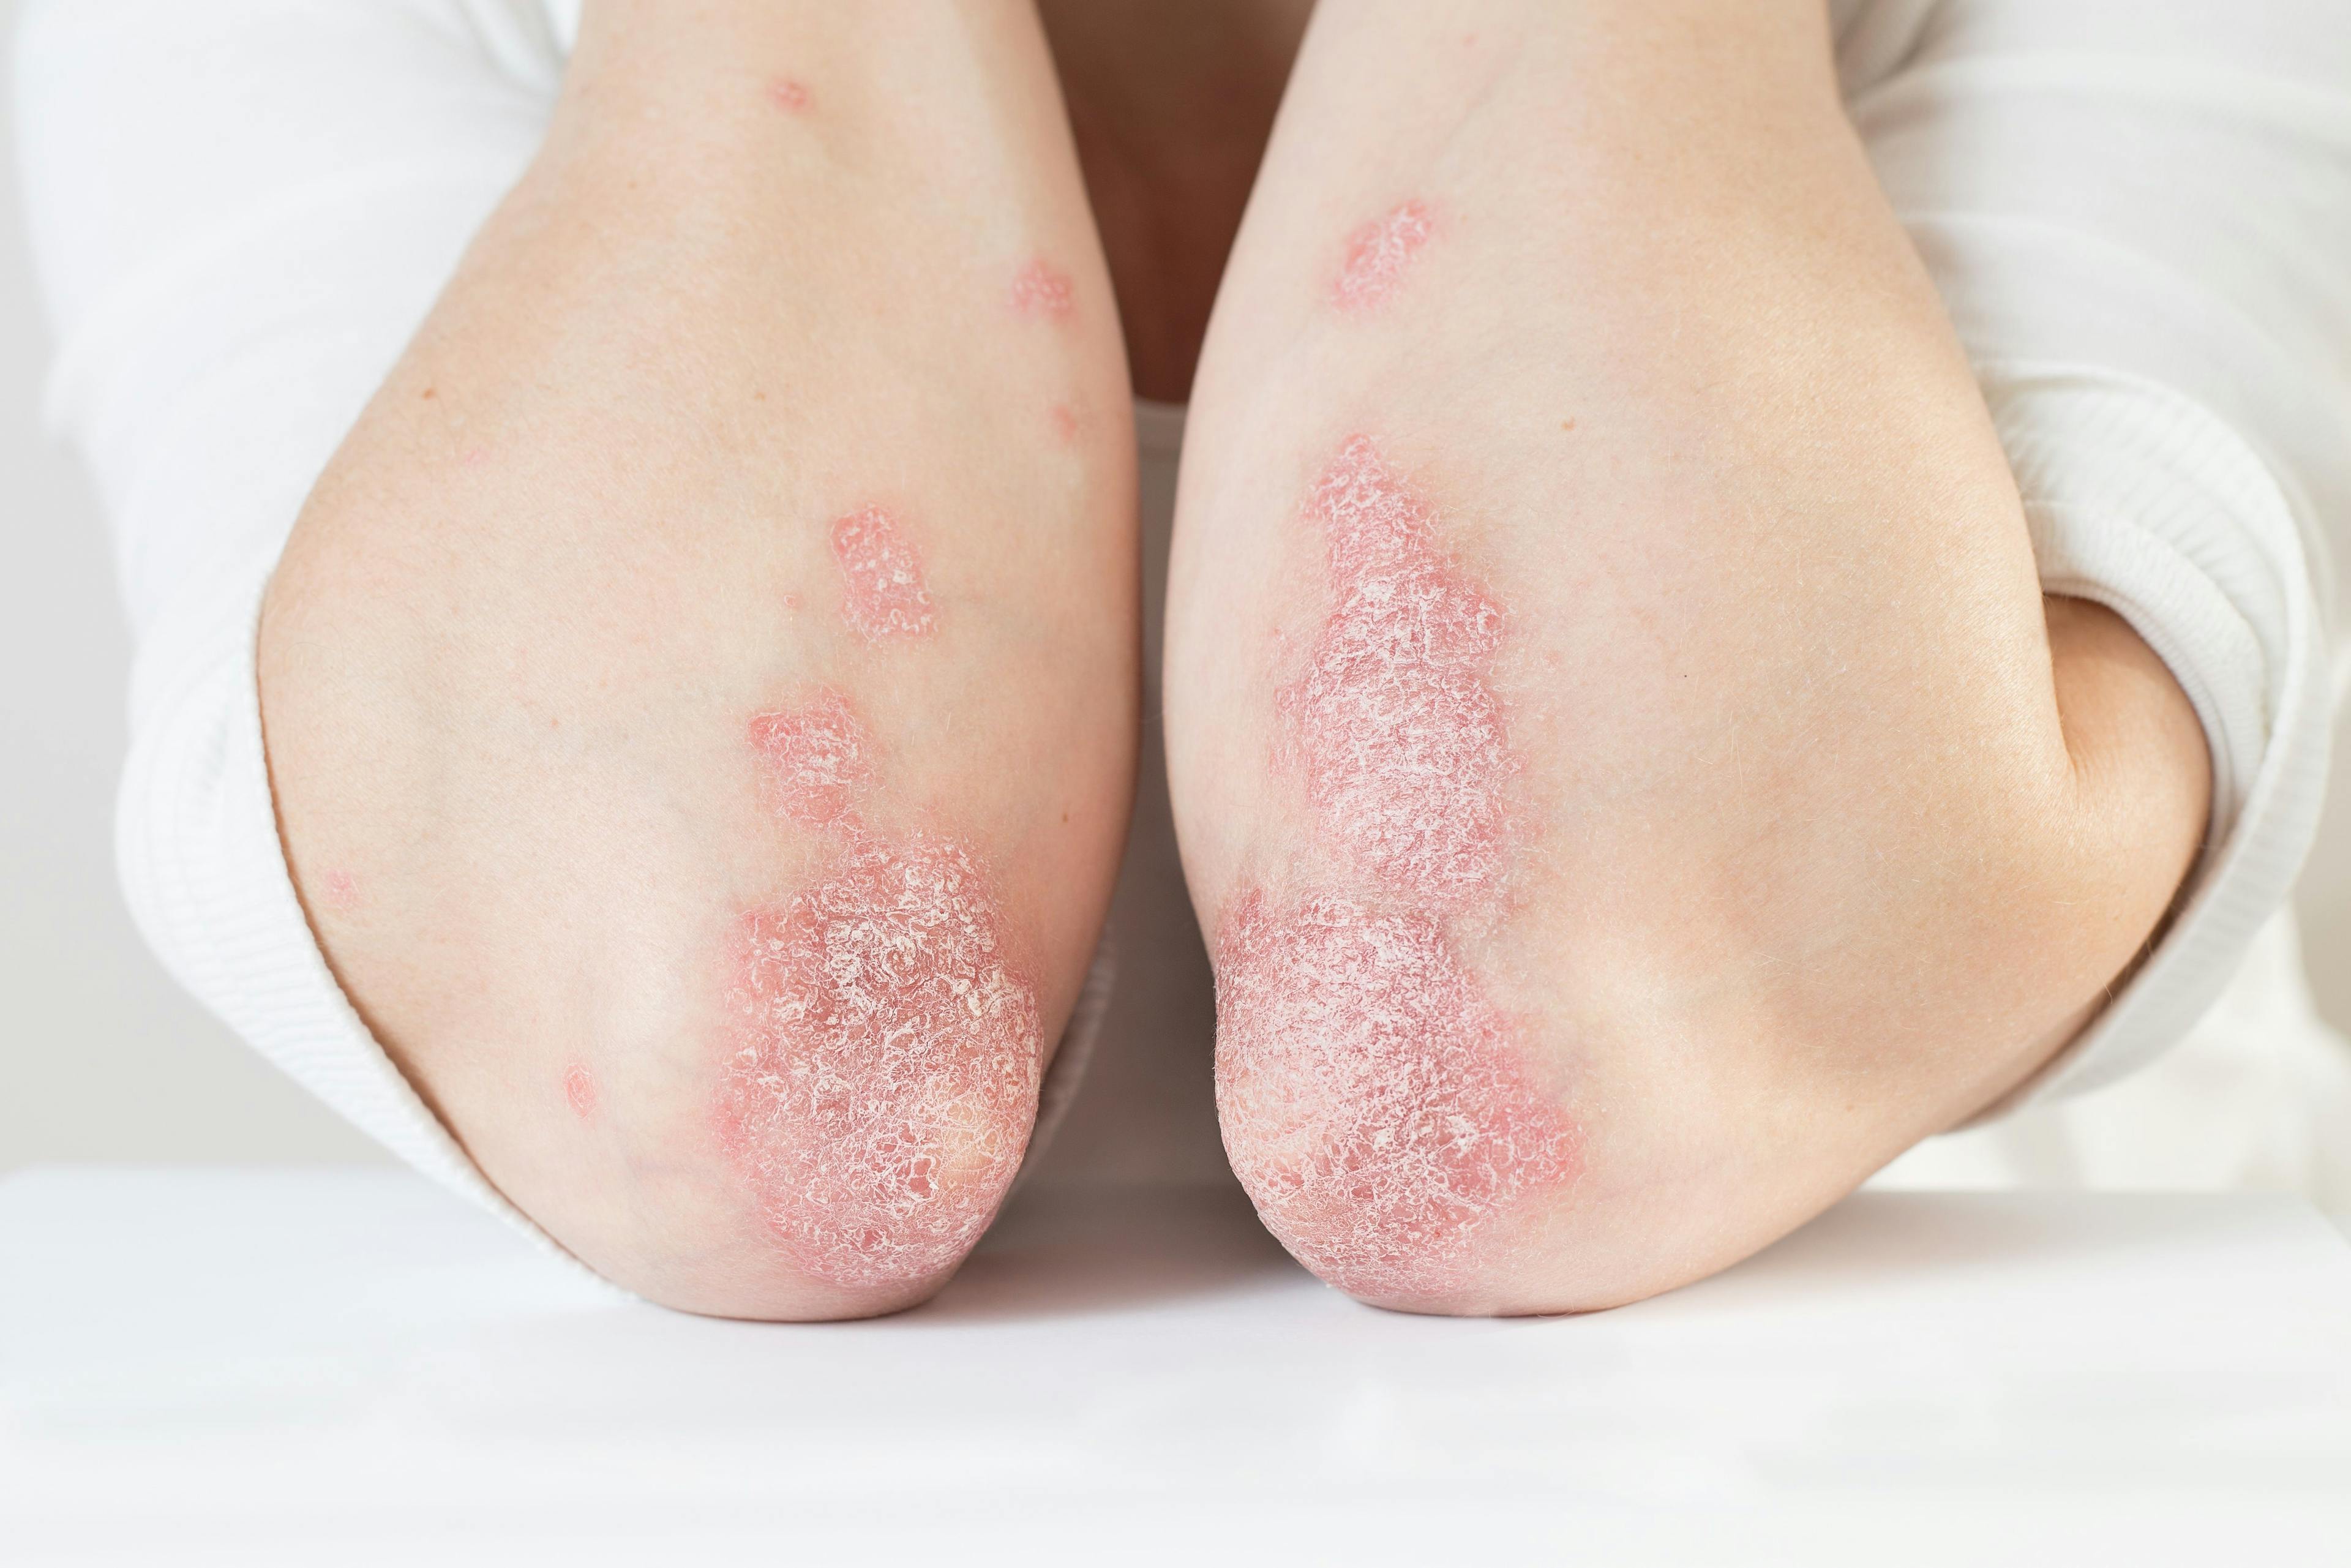 New Research Finds Shared Decision-Making Beneficial in Care of Patients With Eczema    